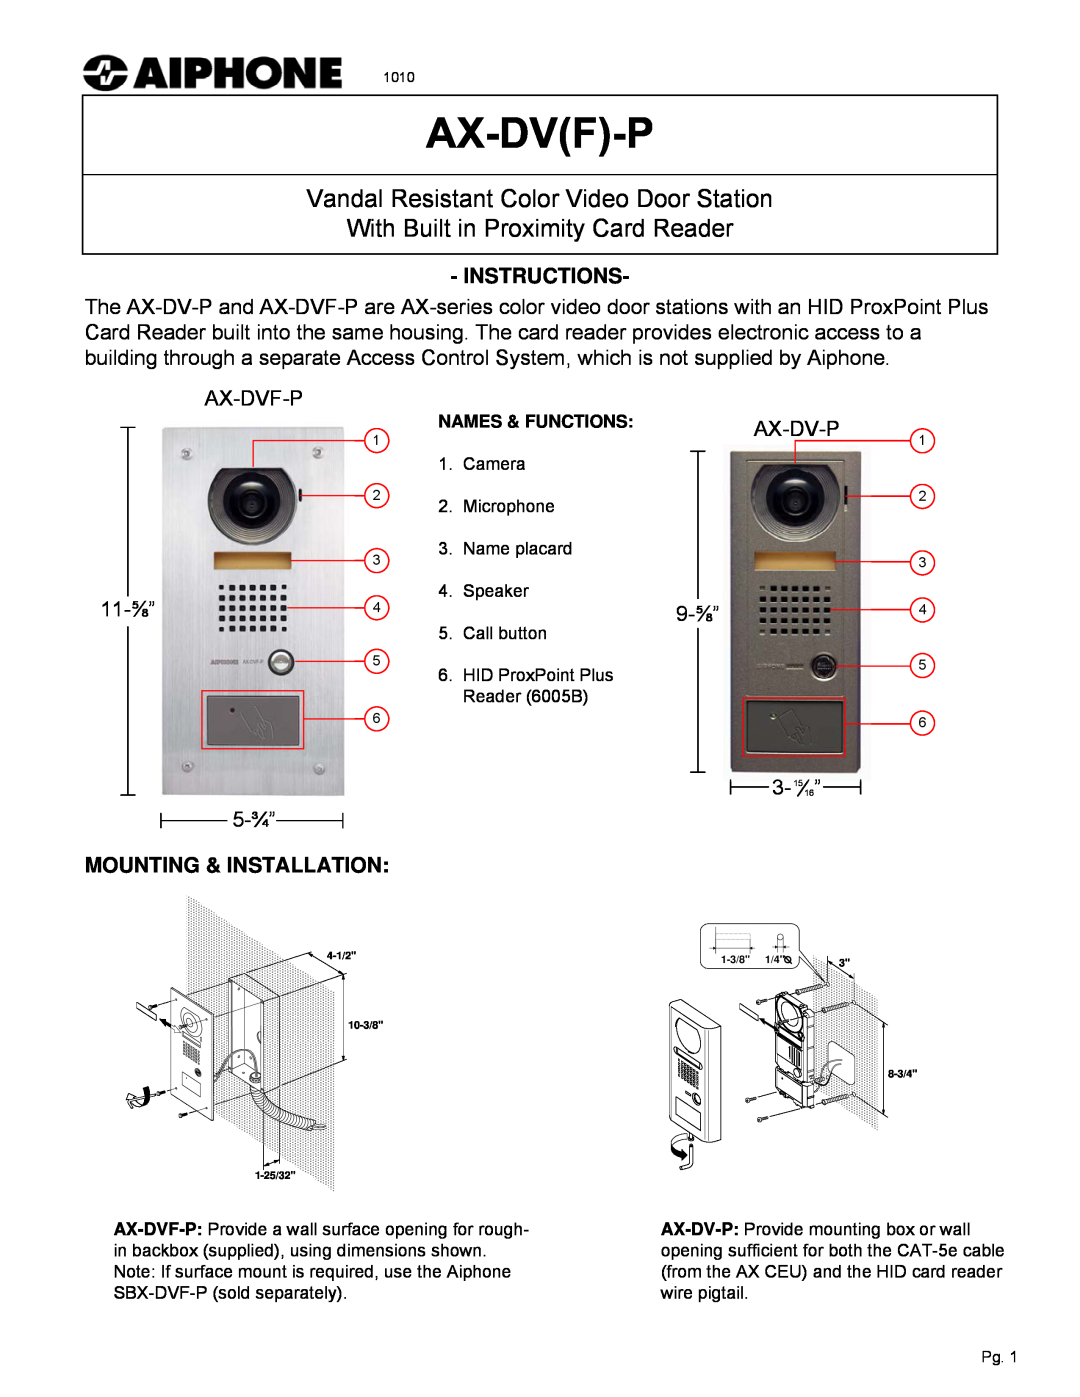 Aiphone AX-DVF-P dimensions Instructions, Mounting & Installation, Vandal Resistant Color Video Door Station 